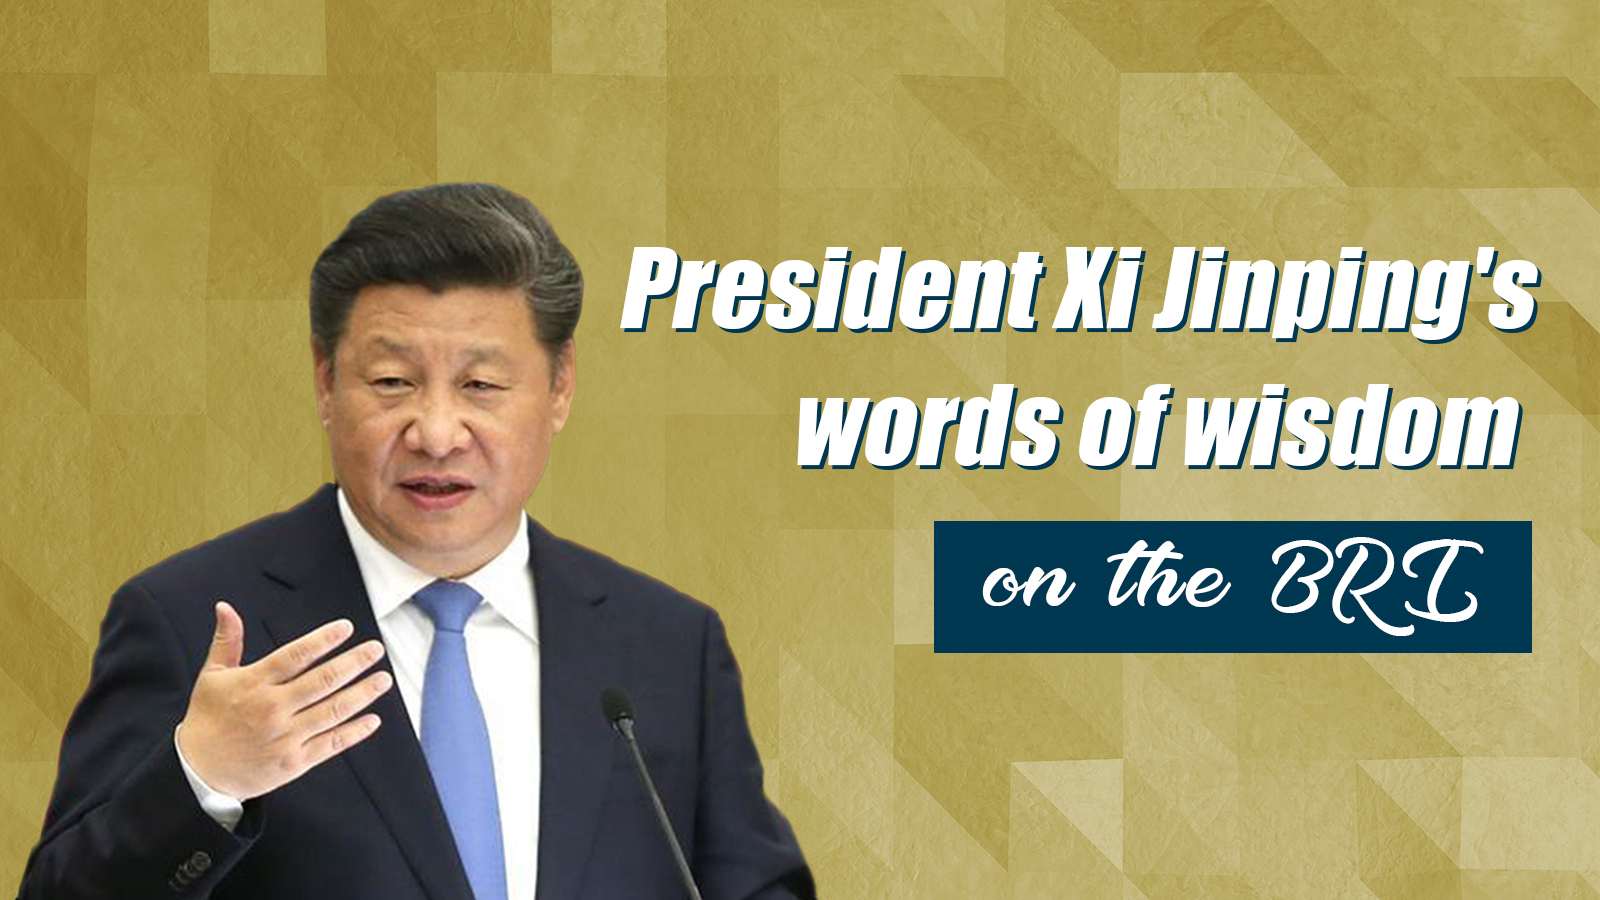 Quotes Xi Jinping | the quotes